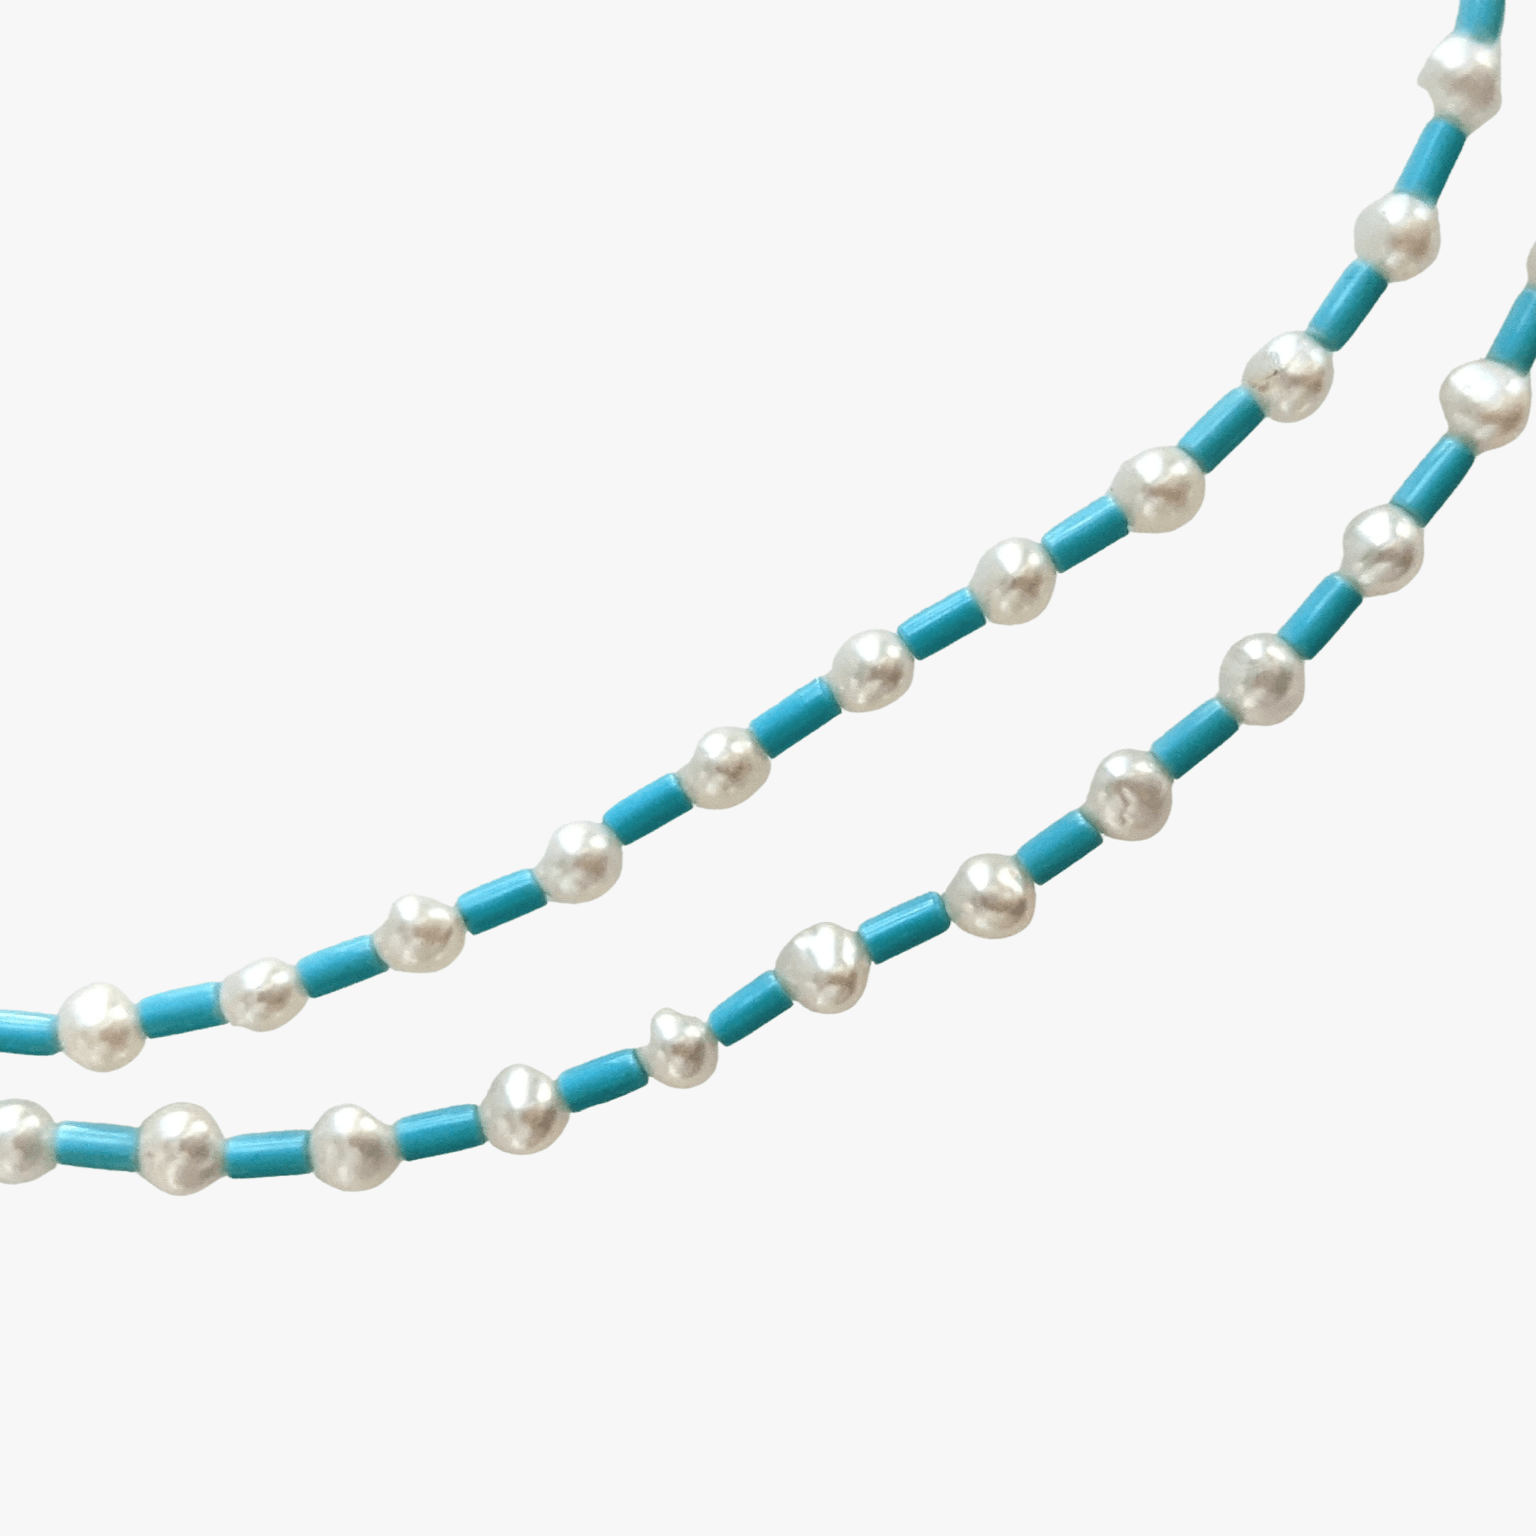 4.0-4.5mm White Freshwater Pearls and Turquoise Necklace - Marina Korneev Fine Pearls